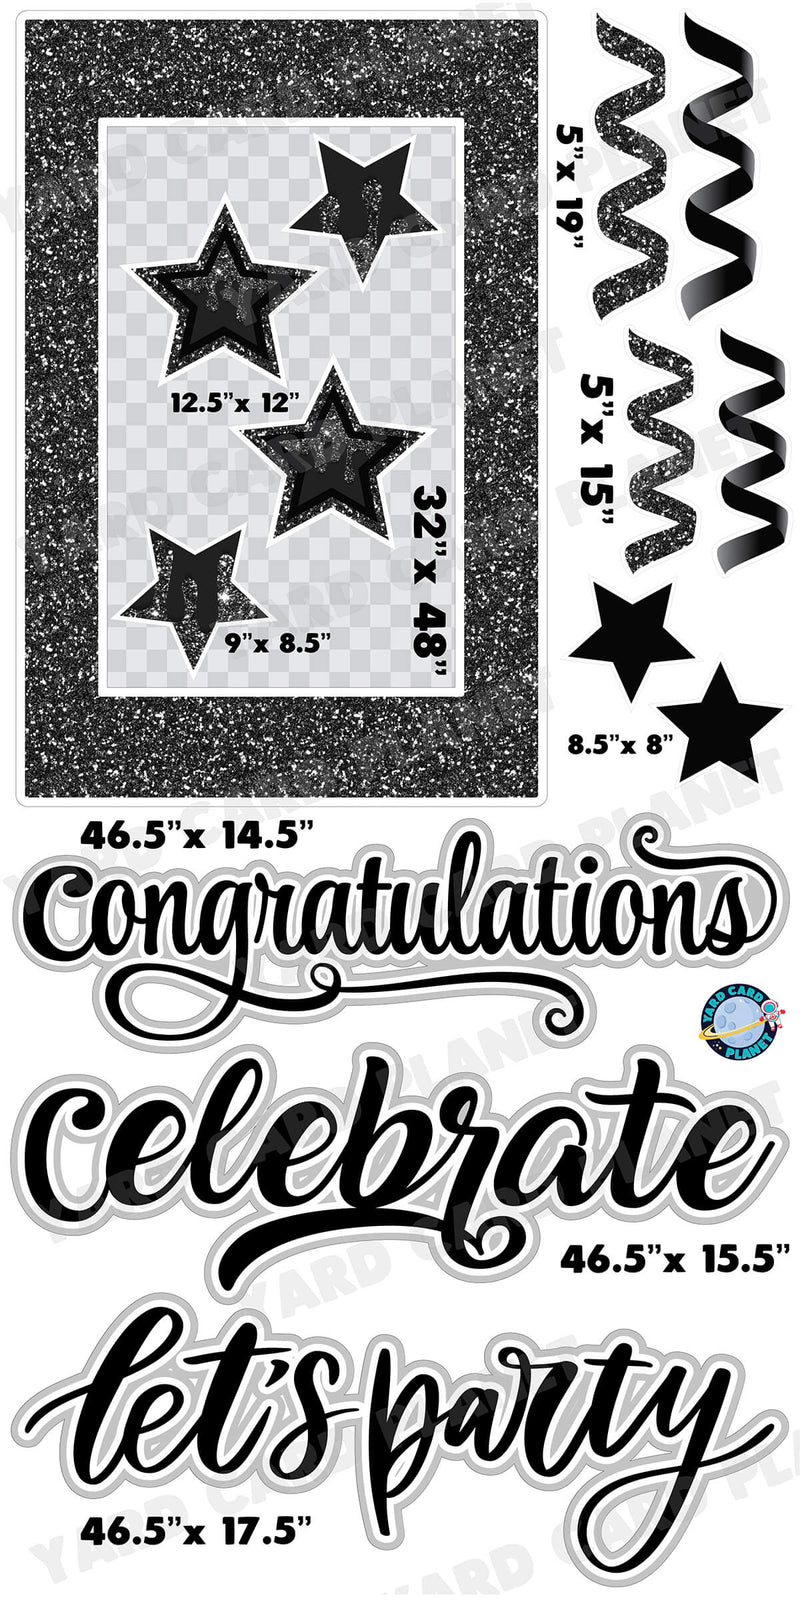  Black Glitter Multi Purpose EZ Frame with Interchangeable Greetings and Matching Yard Card Flair Set with Mesurements